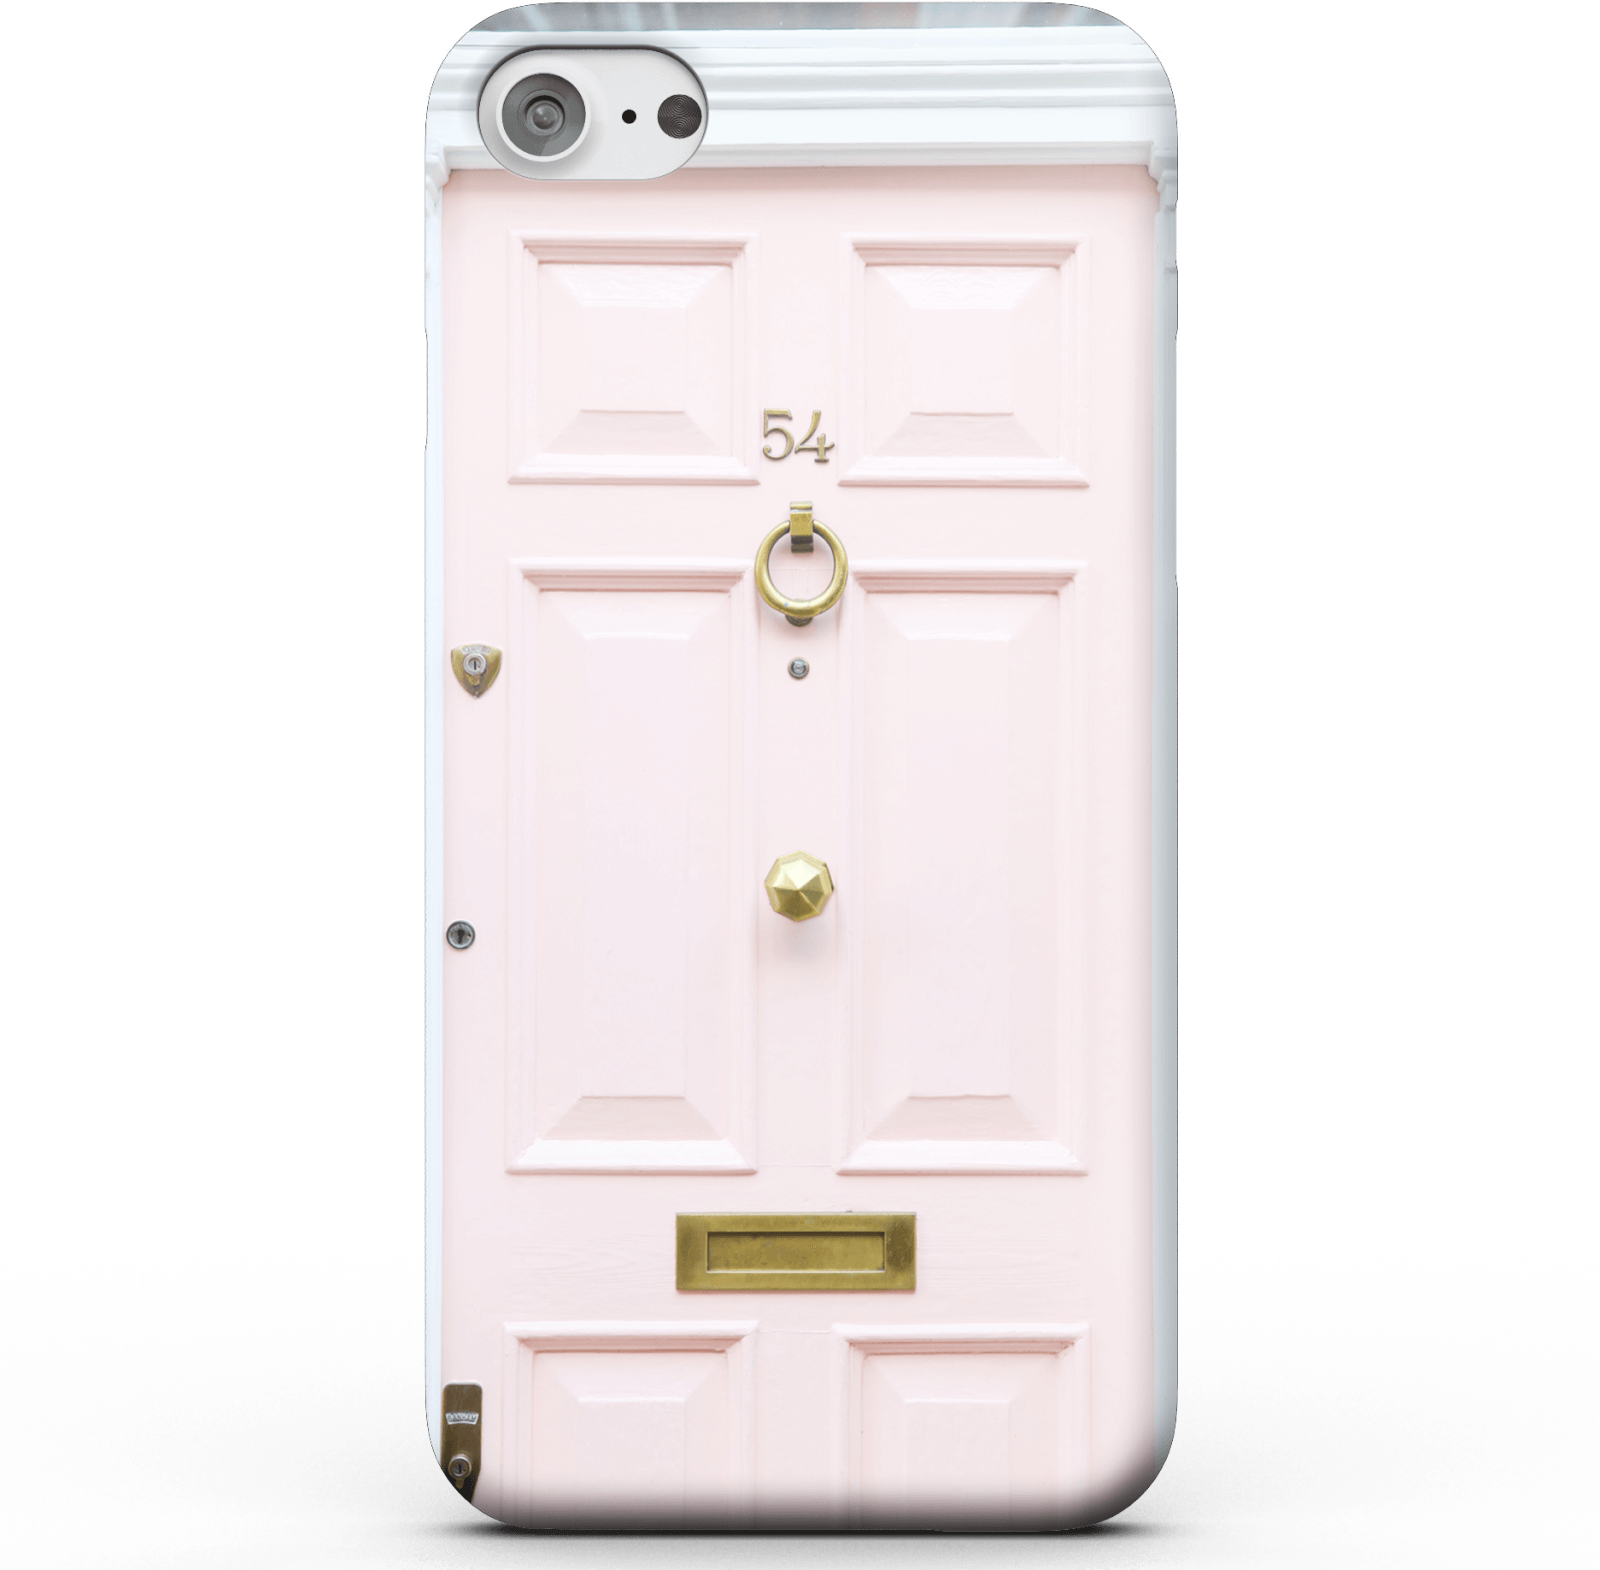 Door 54 Phone Case for iPhone and Android - iPhone 5/5s - Snap Case - Matte